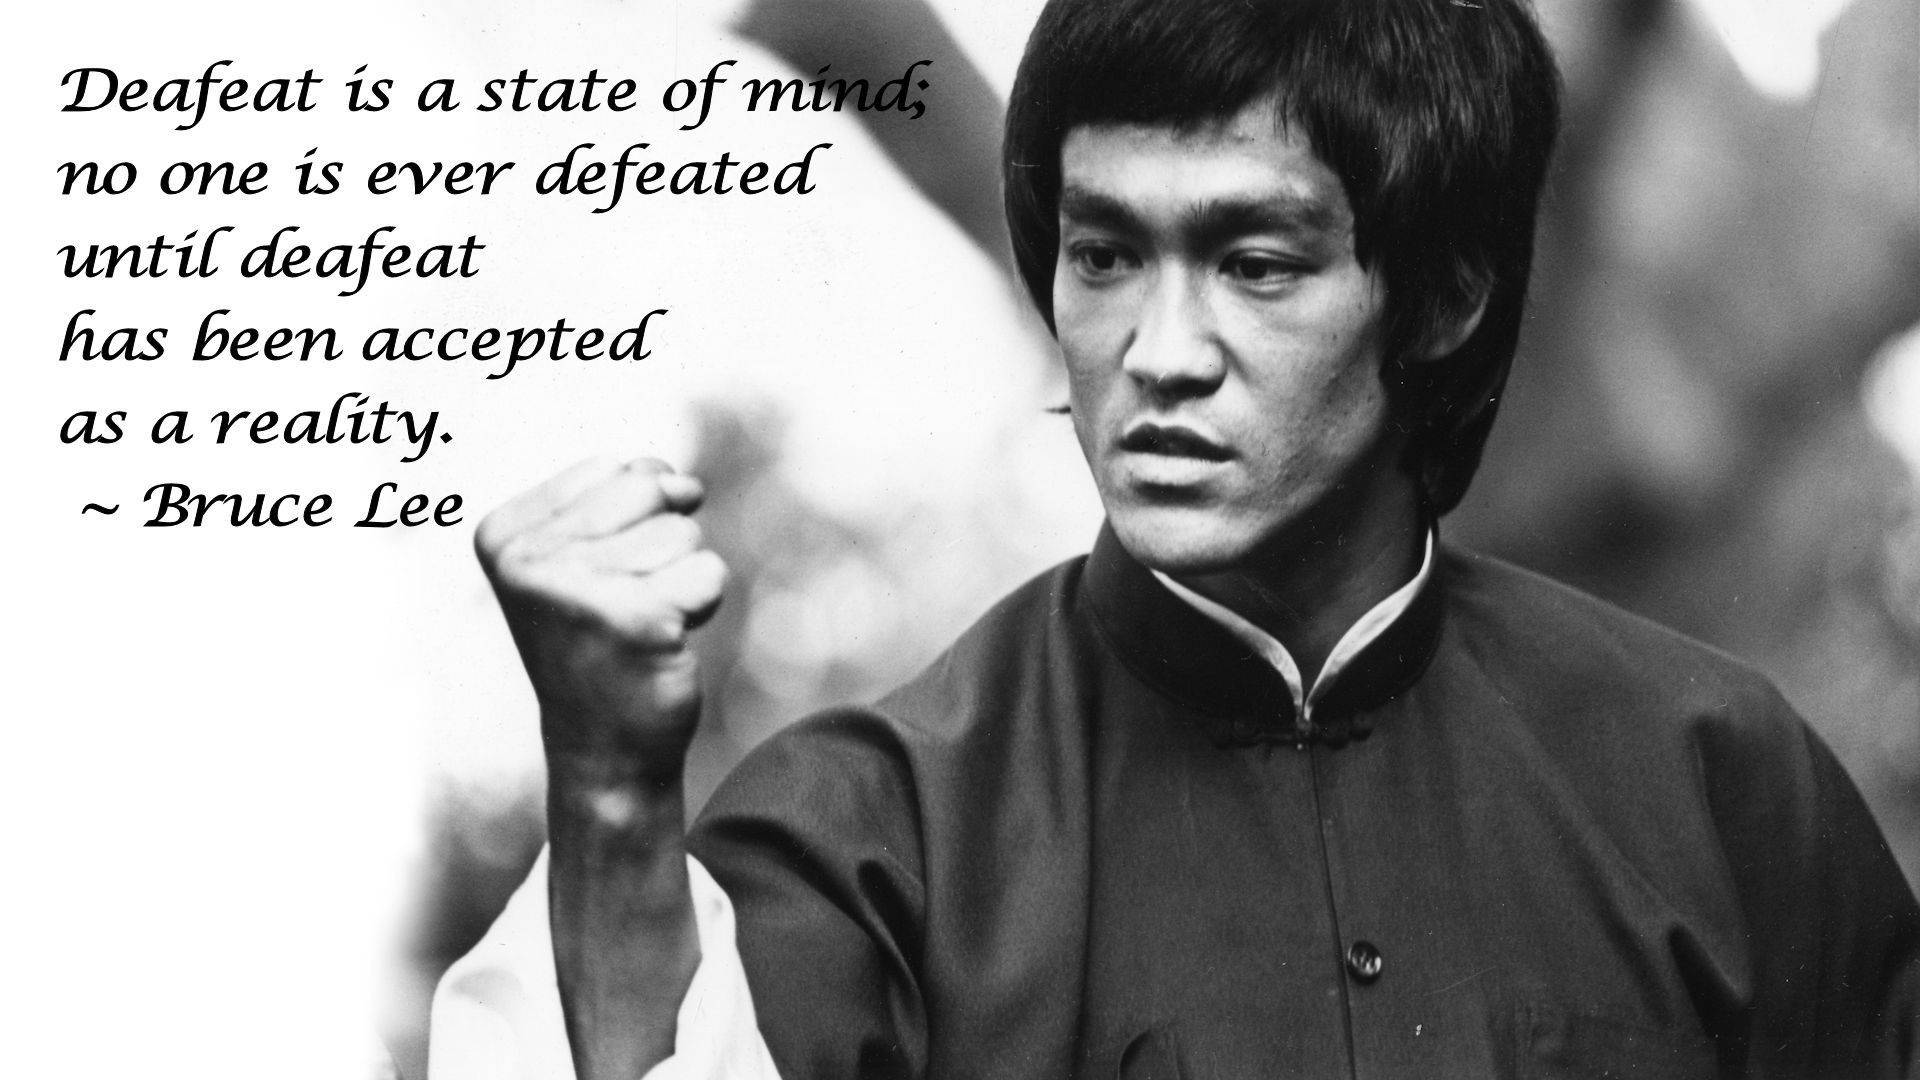 Bruce Lee Quote About Defeat Wallpaper